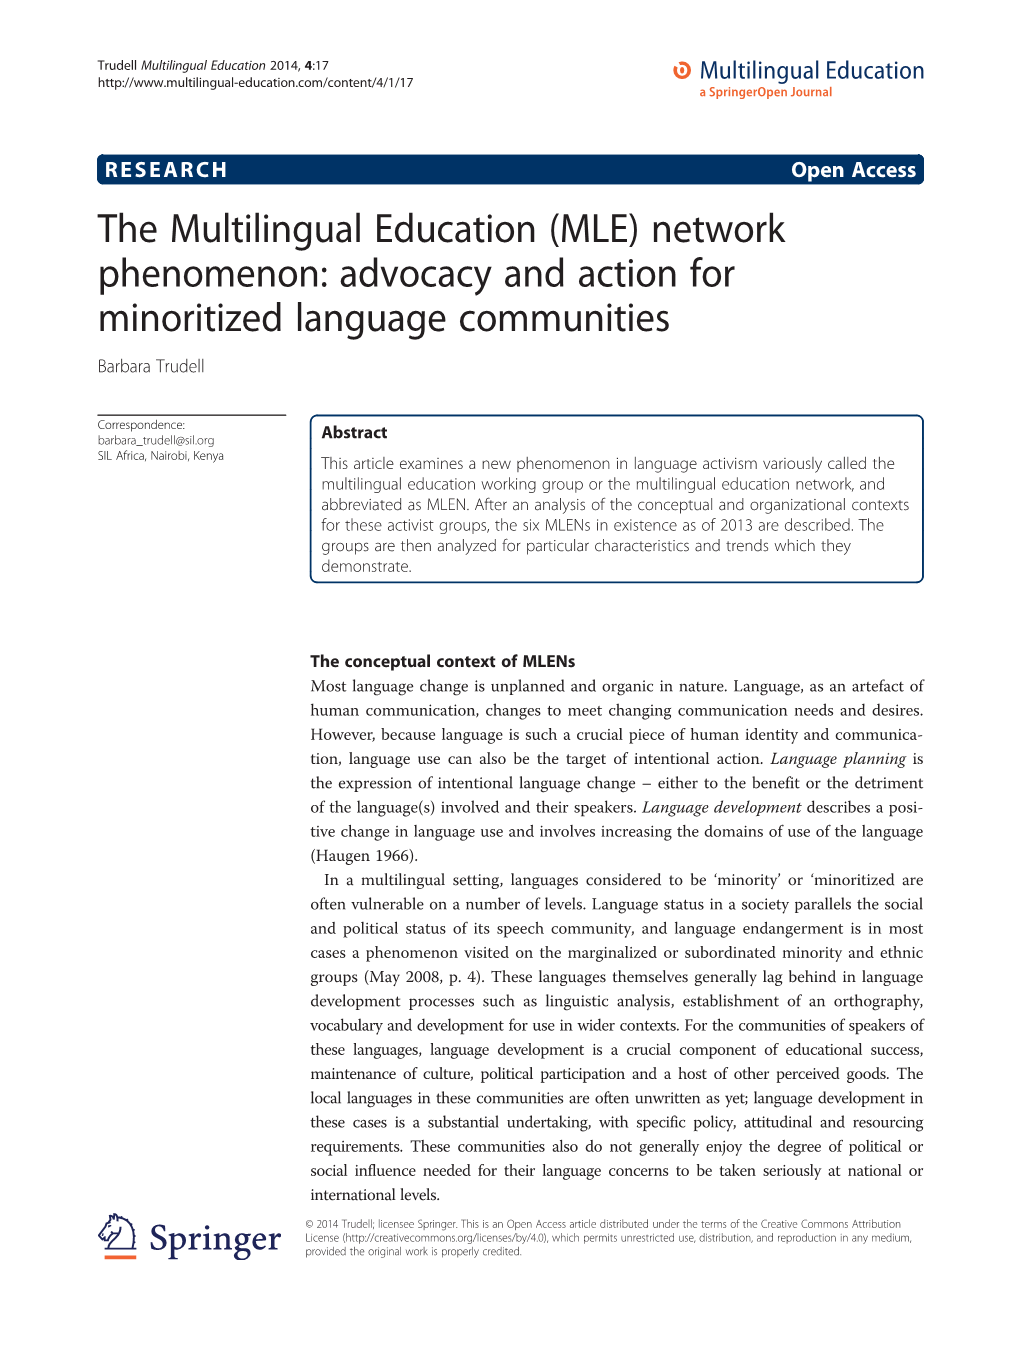 The Multilingual Education (MLE) Network Phenomenon: Advocacy and Action for Minoritized Language Communities Barbara Trudell